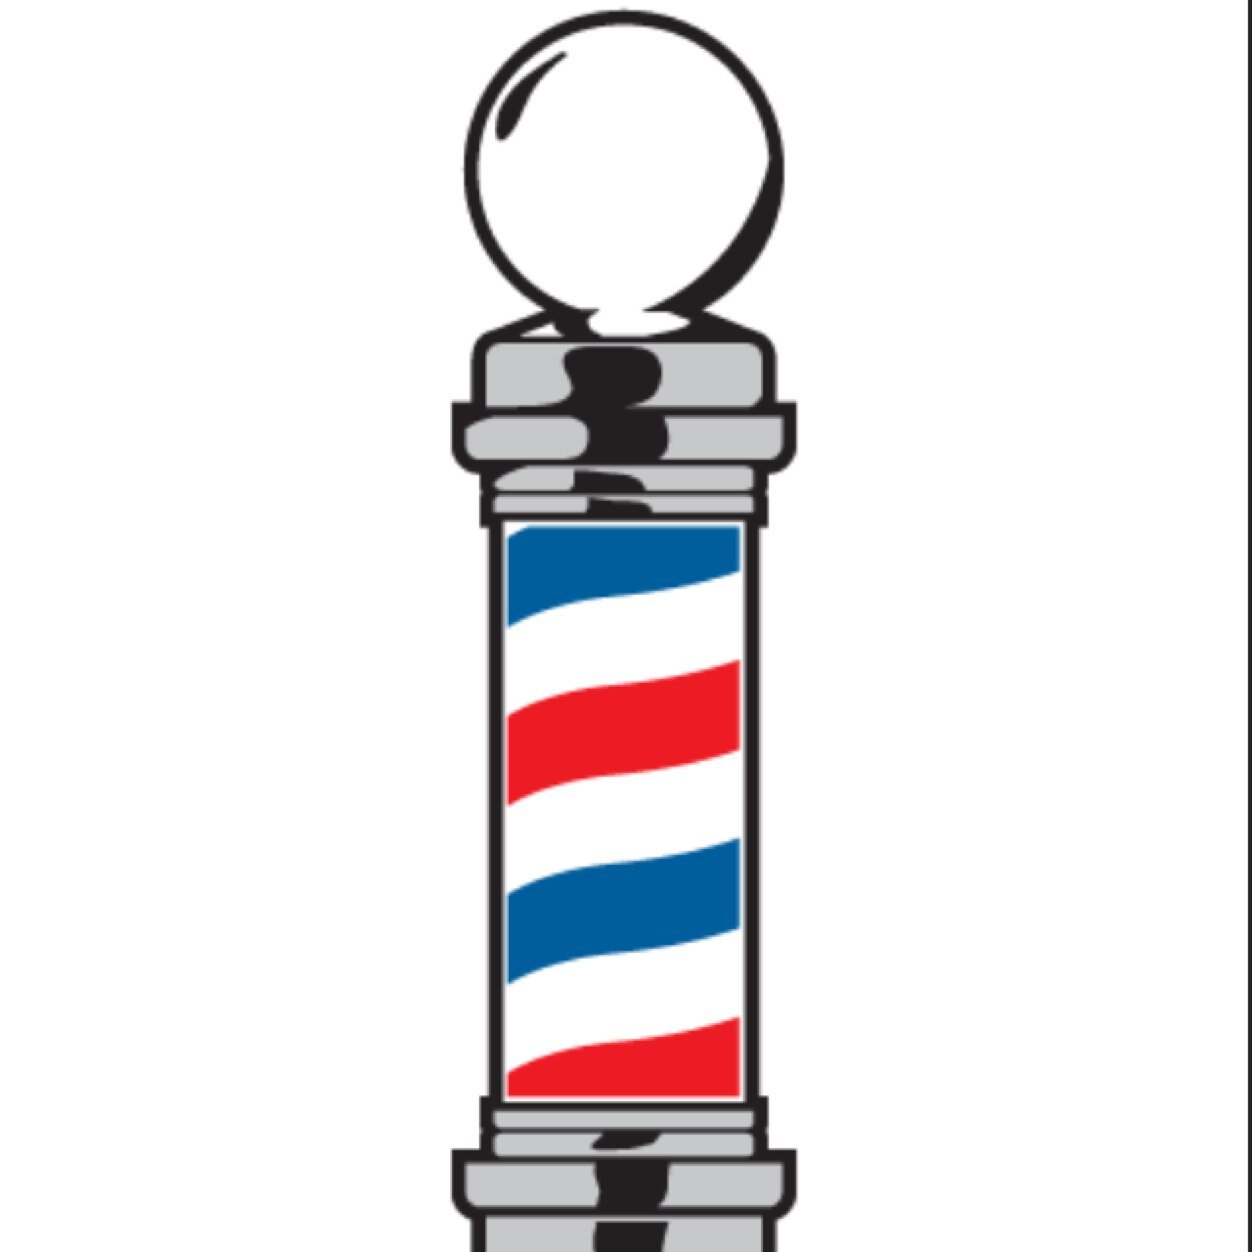 Barber clipart sign. Free shop pictures download